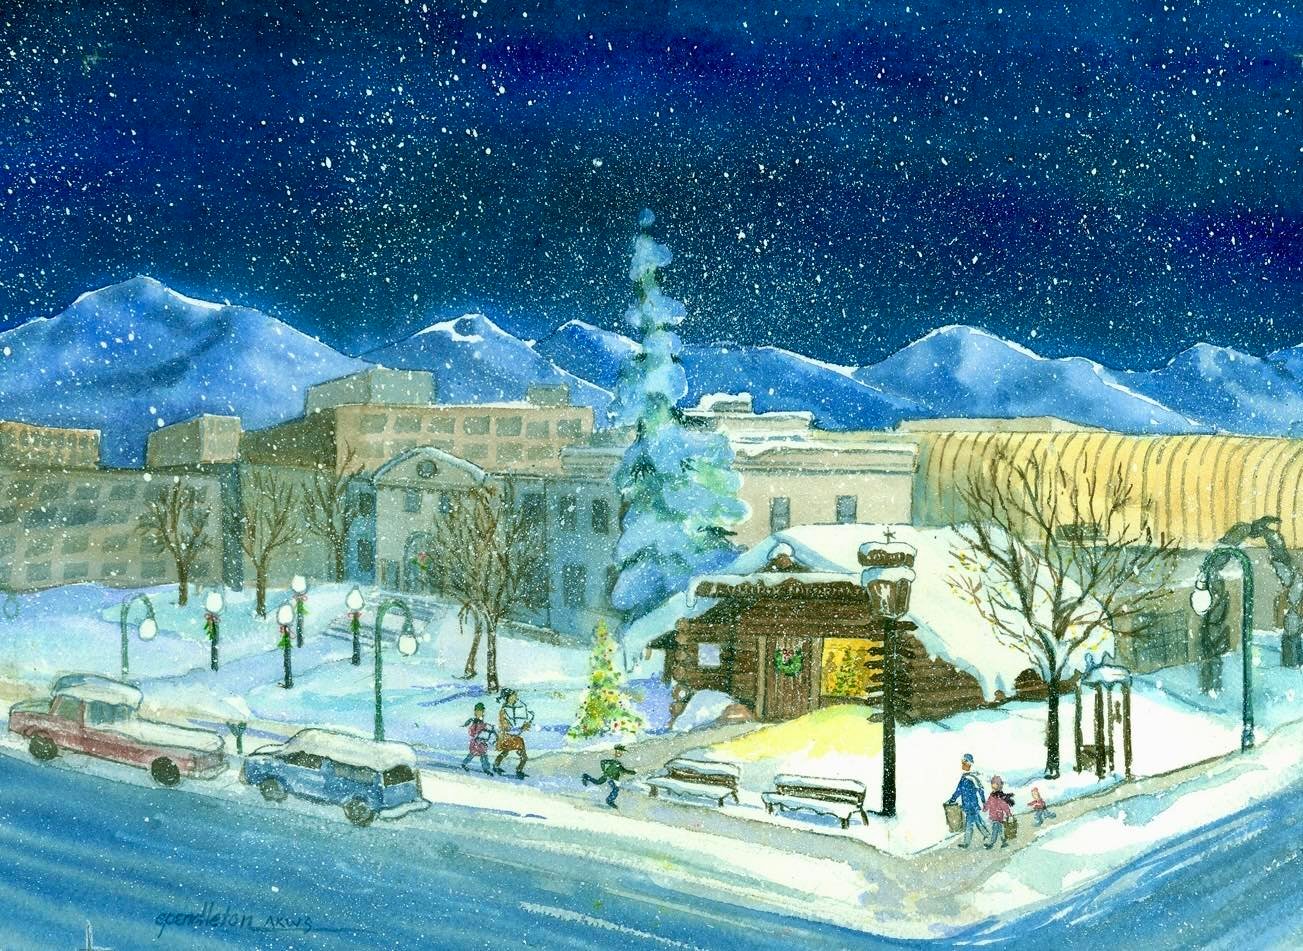 Alaska artist Cindy Pendleton created this Anchorage Art that brings your fond memories to life in watercolor images.